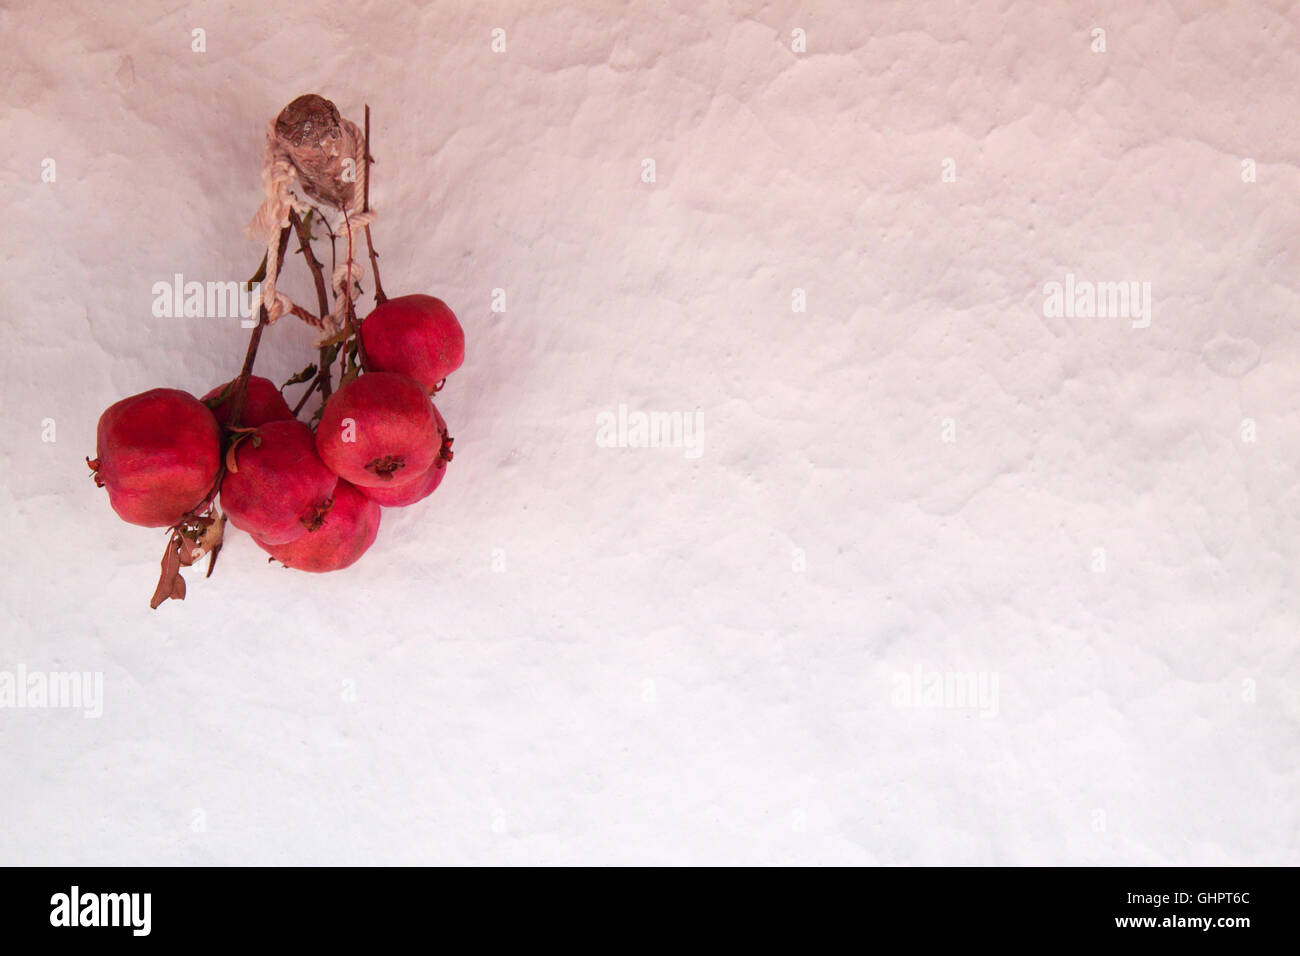 dried pomegranate hanging on the wall Stock Photo